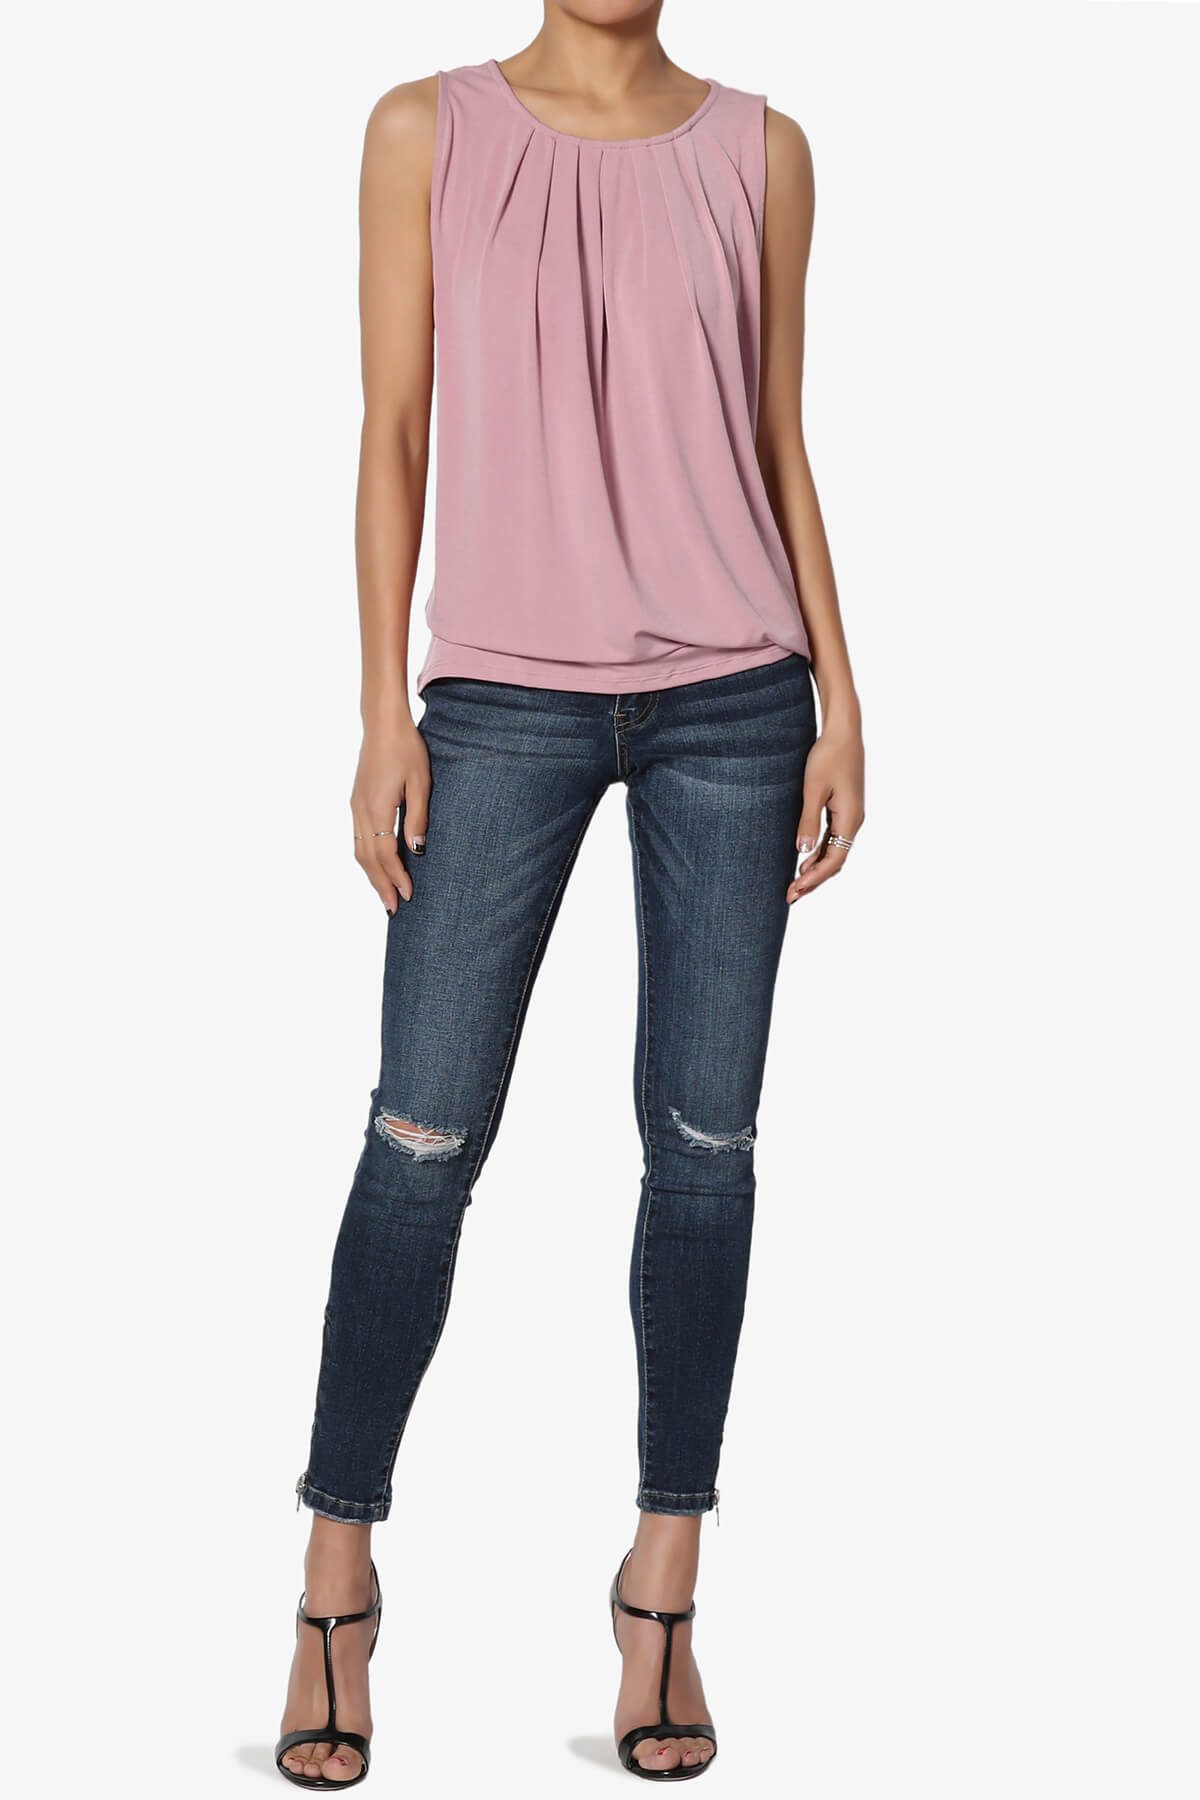 Load image into Gallery viewer, Chaffee Pleat Neck Tank Top LIGHT ROSE_6
